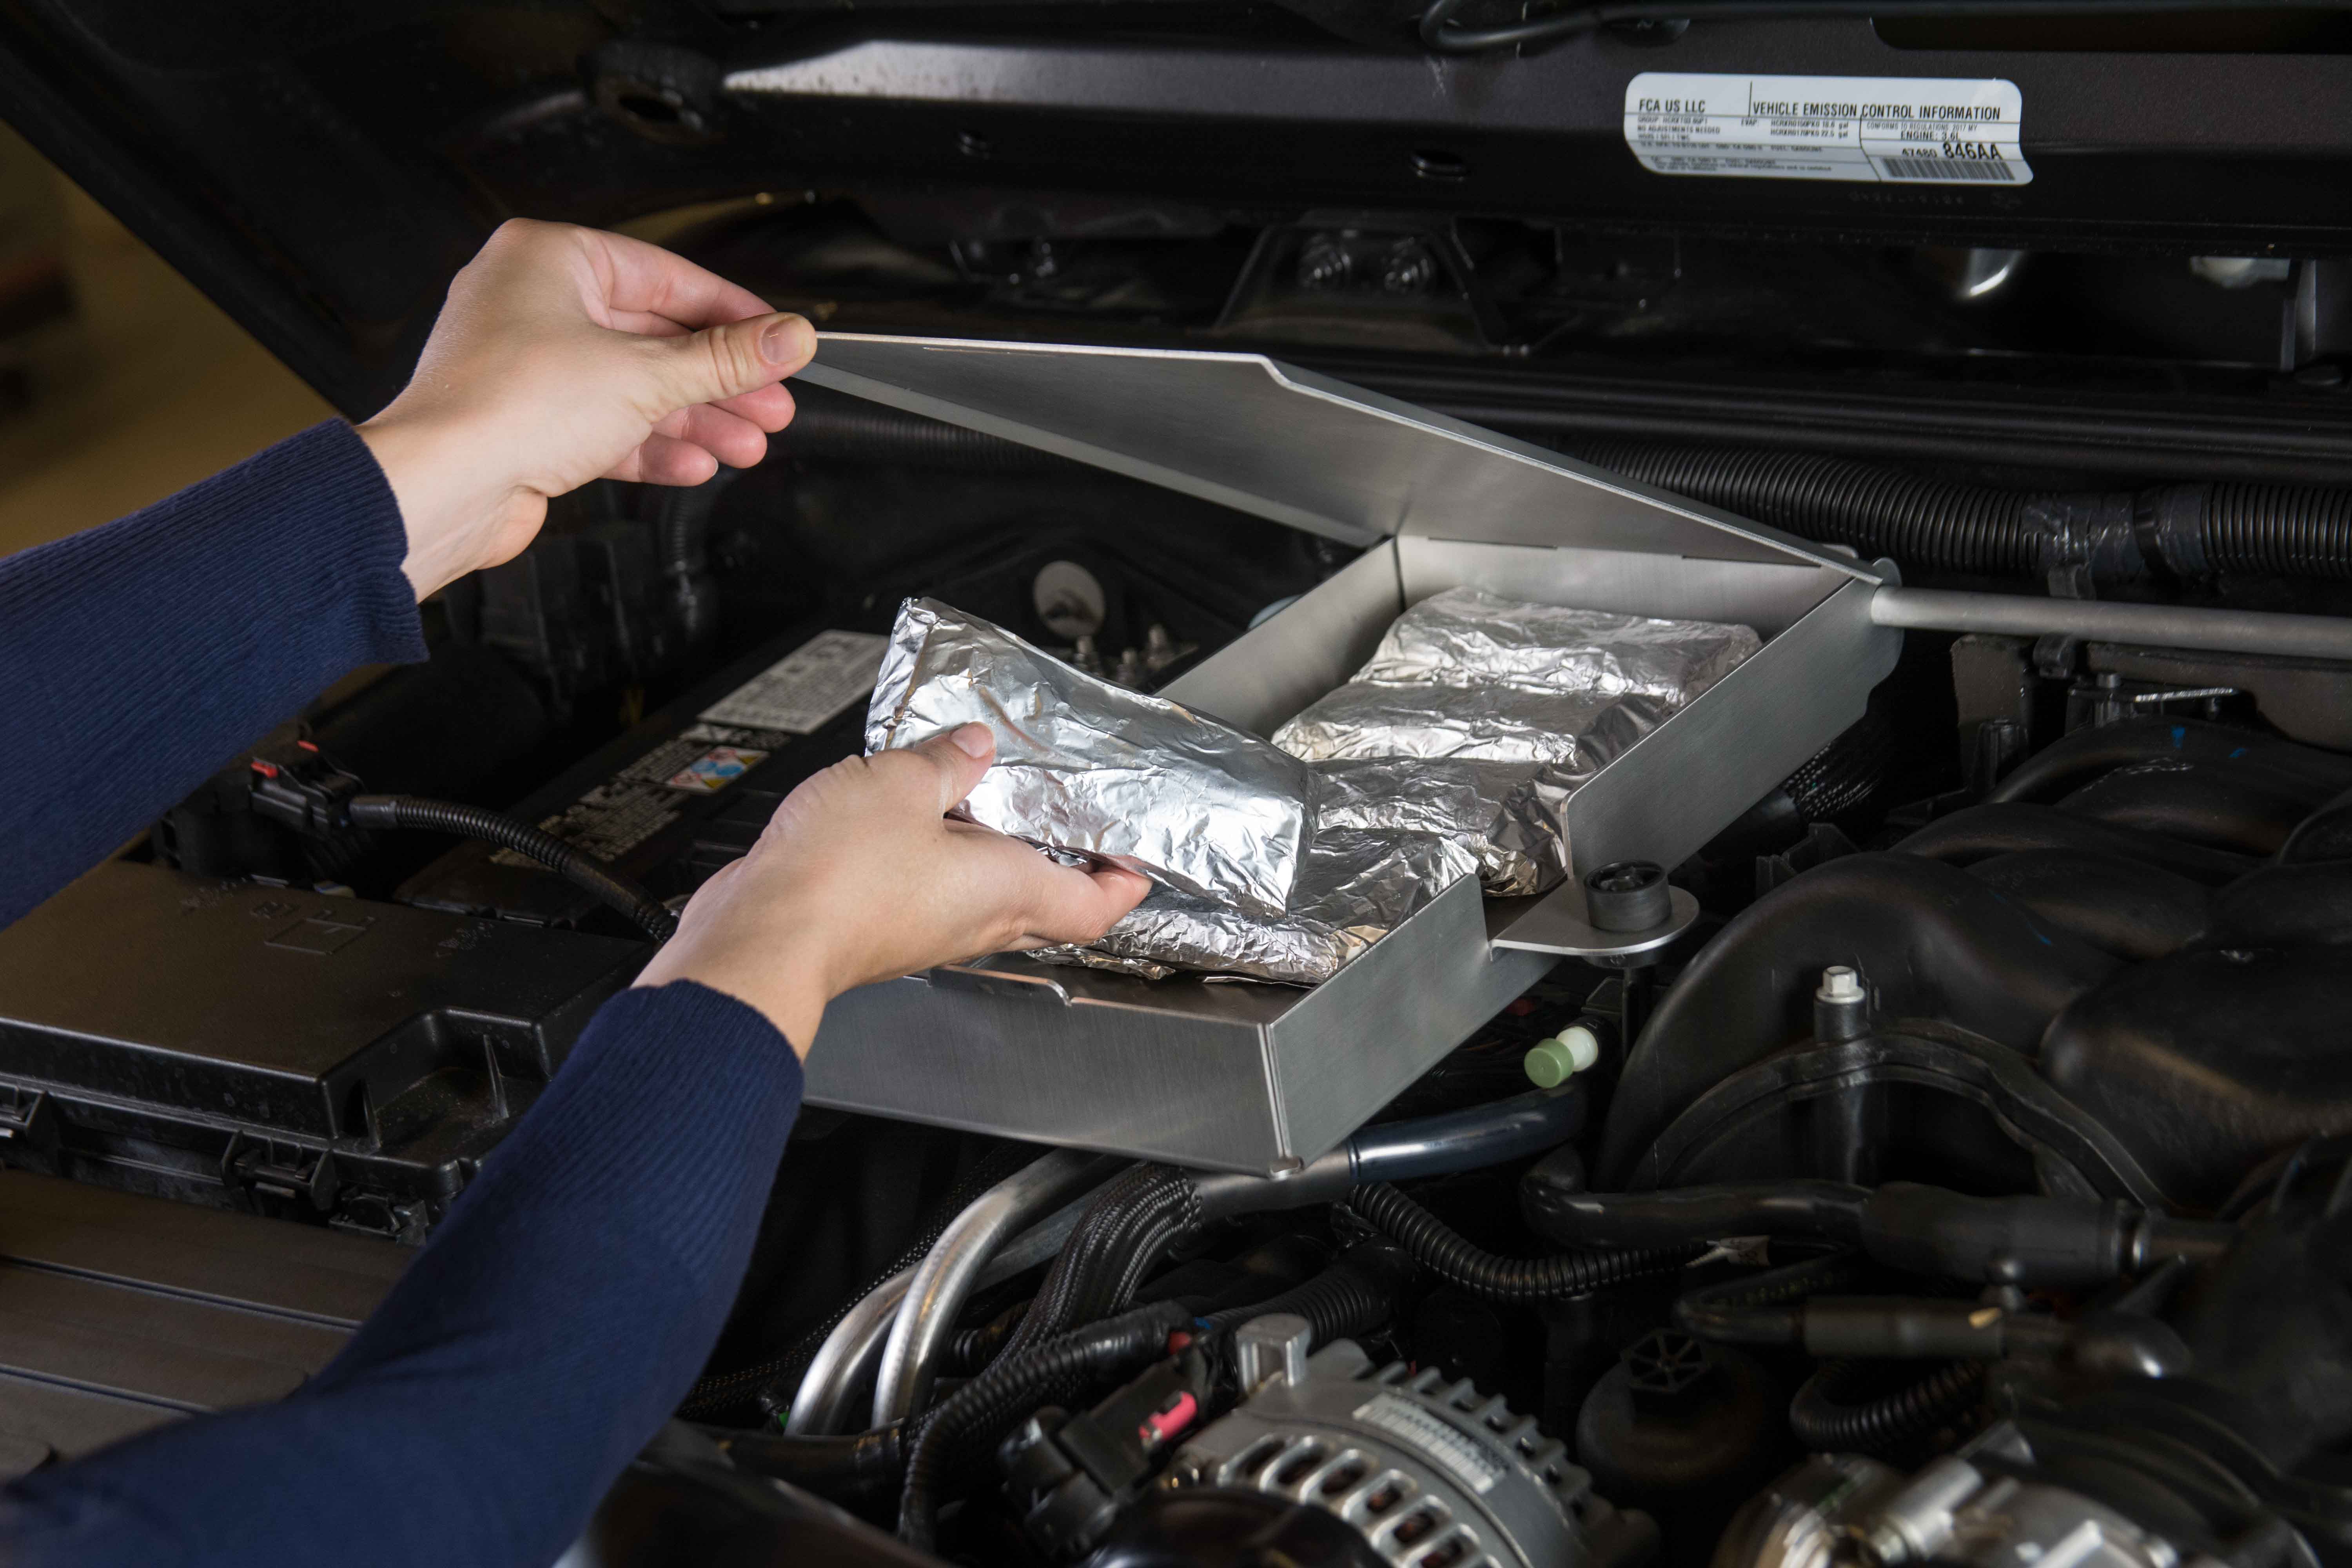 Repurposing the thermal dynamics of the Jeep’s manifold, the all aluminum Trail Oven Warmer efficiently reheats previously prepared and precooked foods like burritos, tortillas and sandwiches.